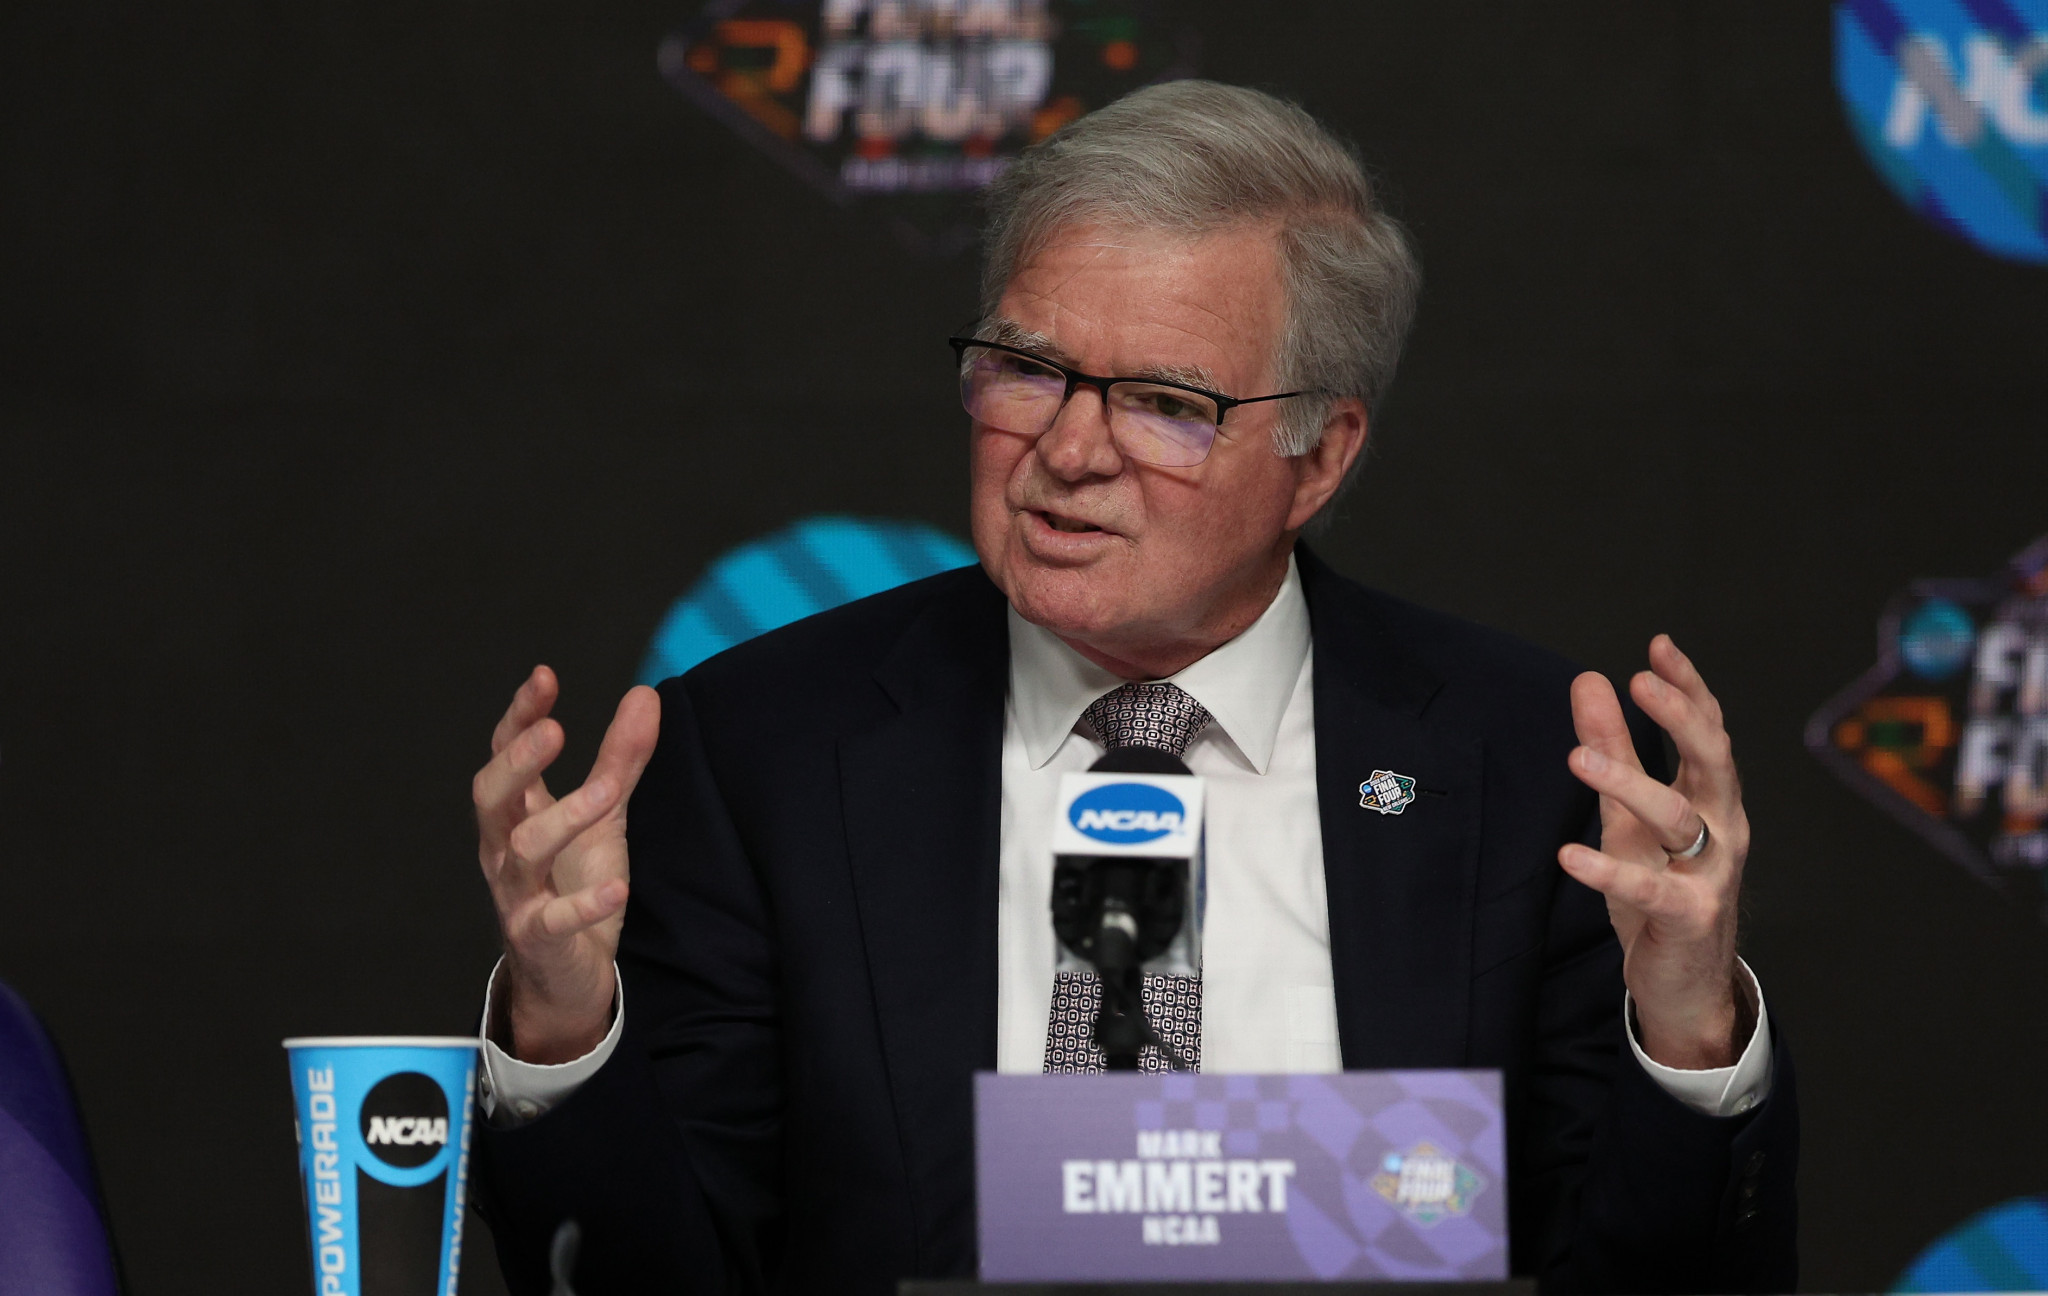 Mark Emmert has been head of the National Collegiate Athletic Association since 2010 and agreed a contract extension last year ©Getty Images